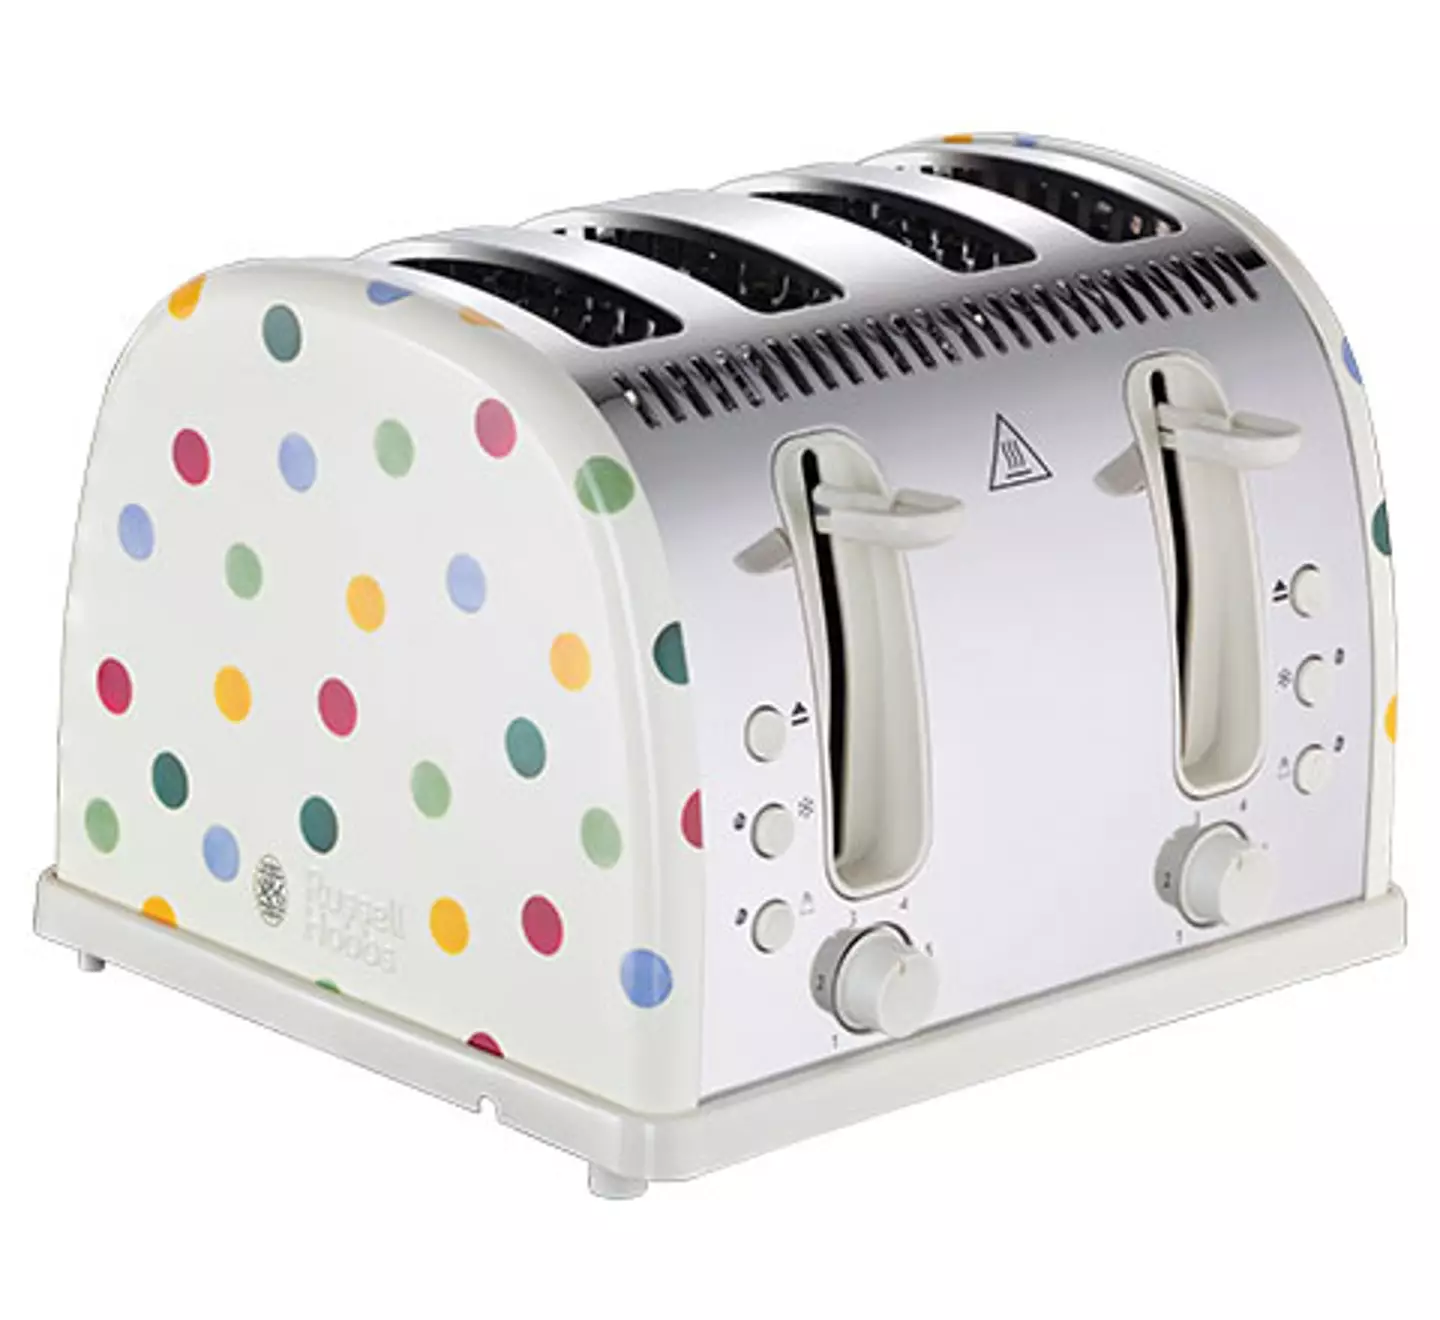 Russell Hobbs's UK Brand Manager says Emma Bridgewater designs brighten up the home (